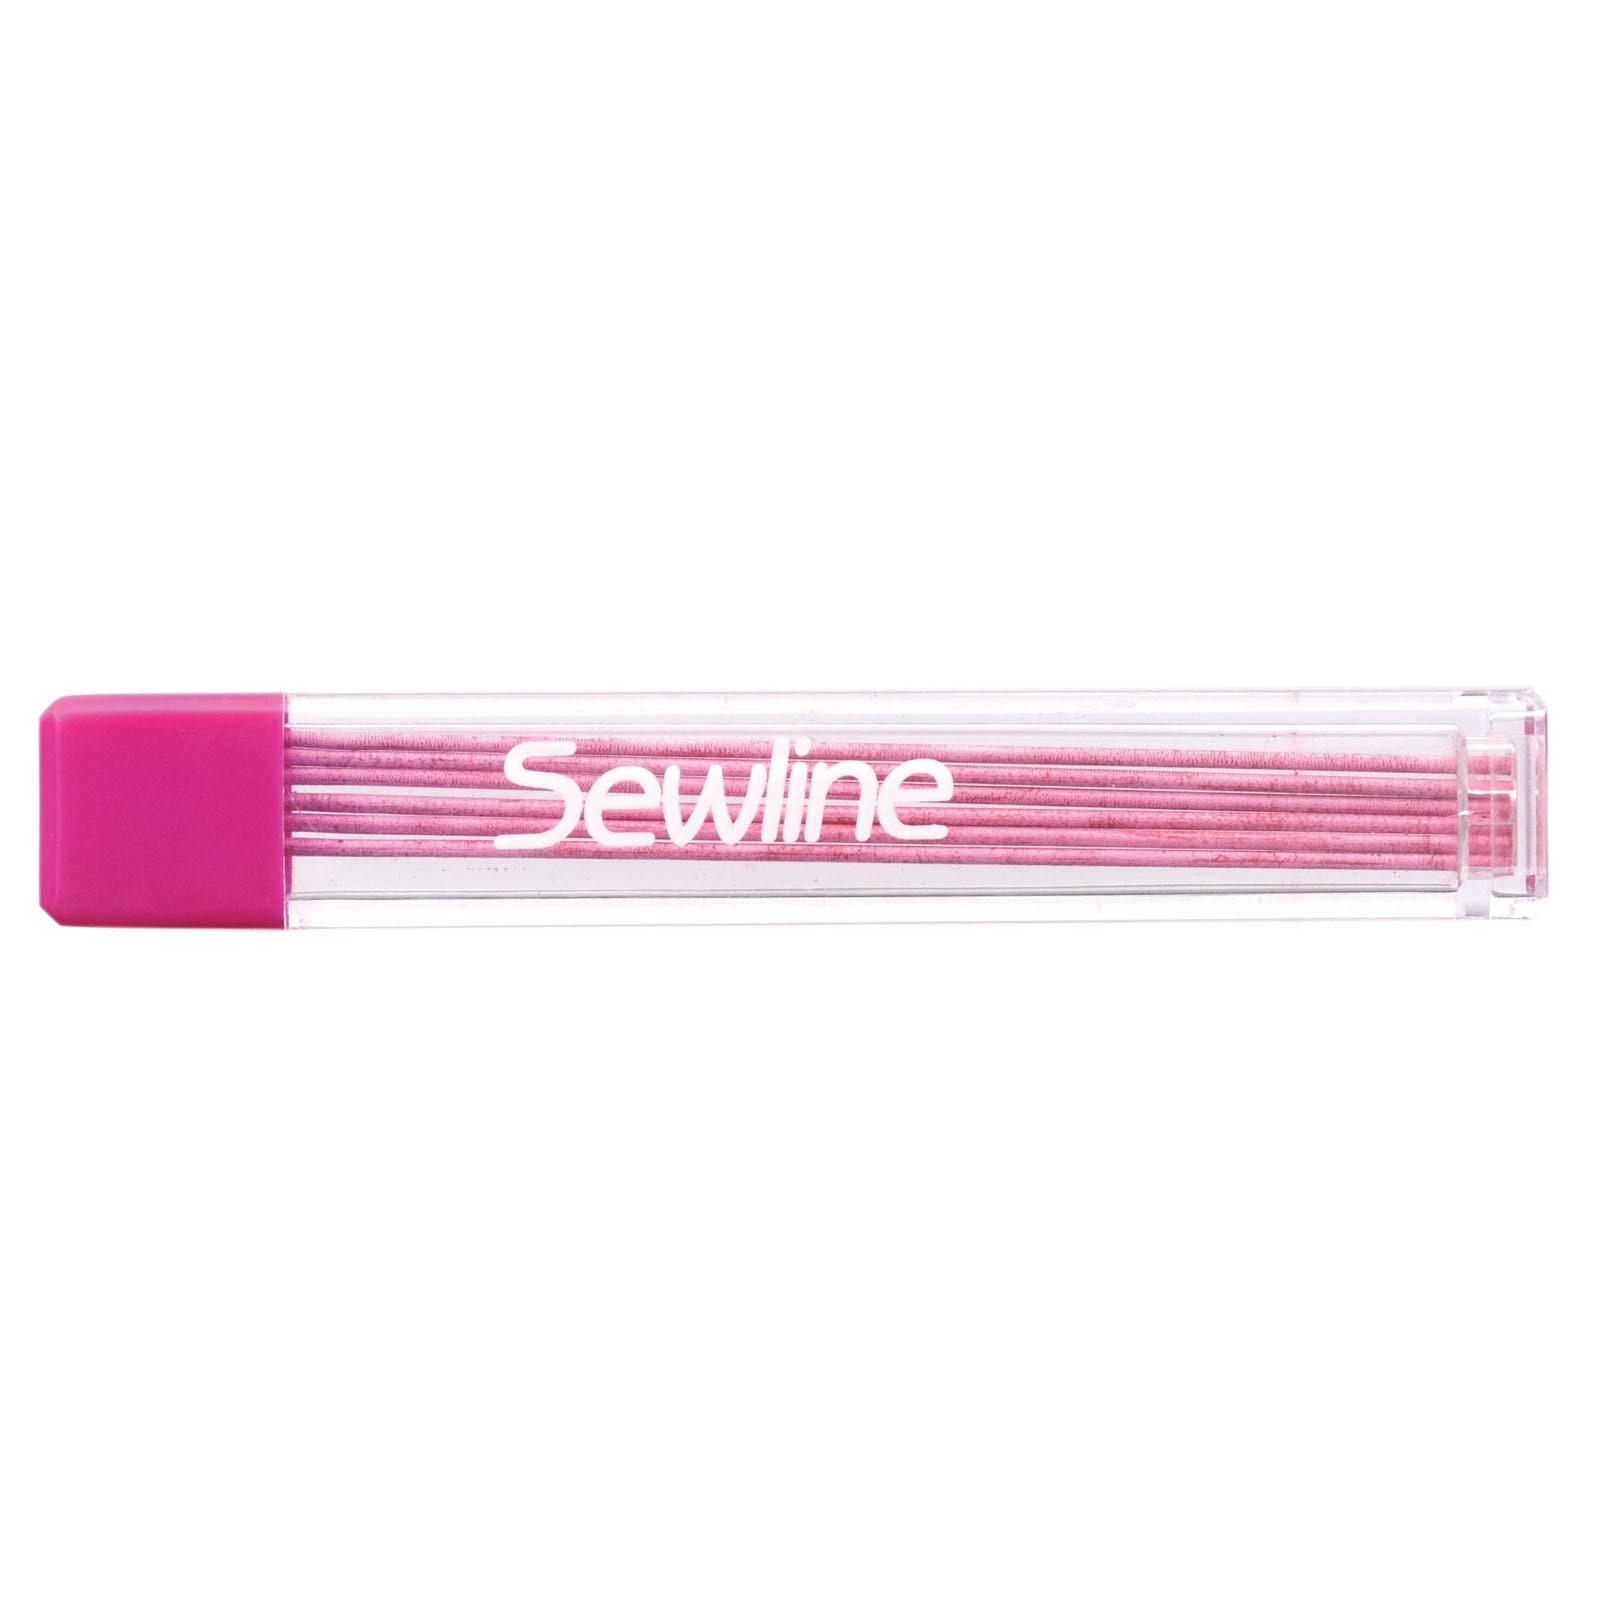 Sewline Fabric Mechanical Pencil - Blue - 4989783070683 Quilting